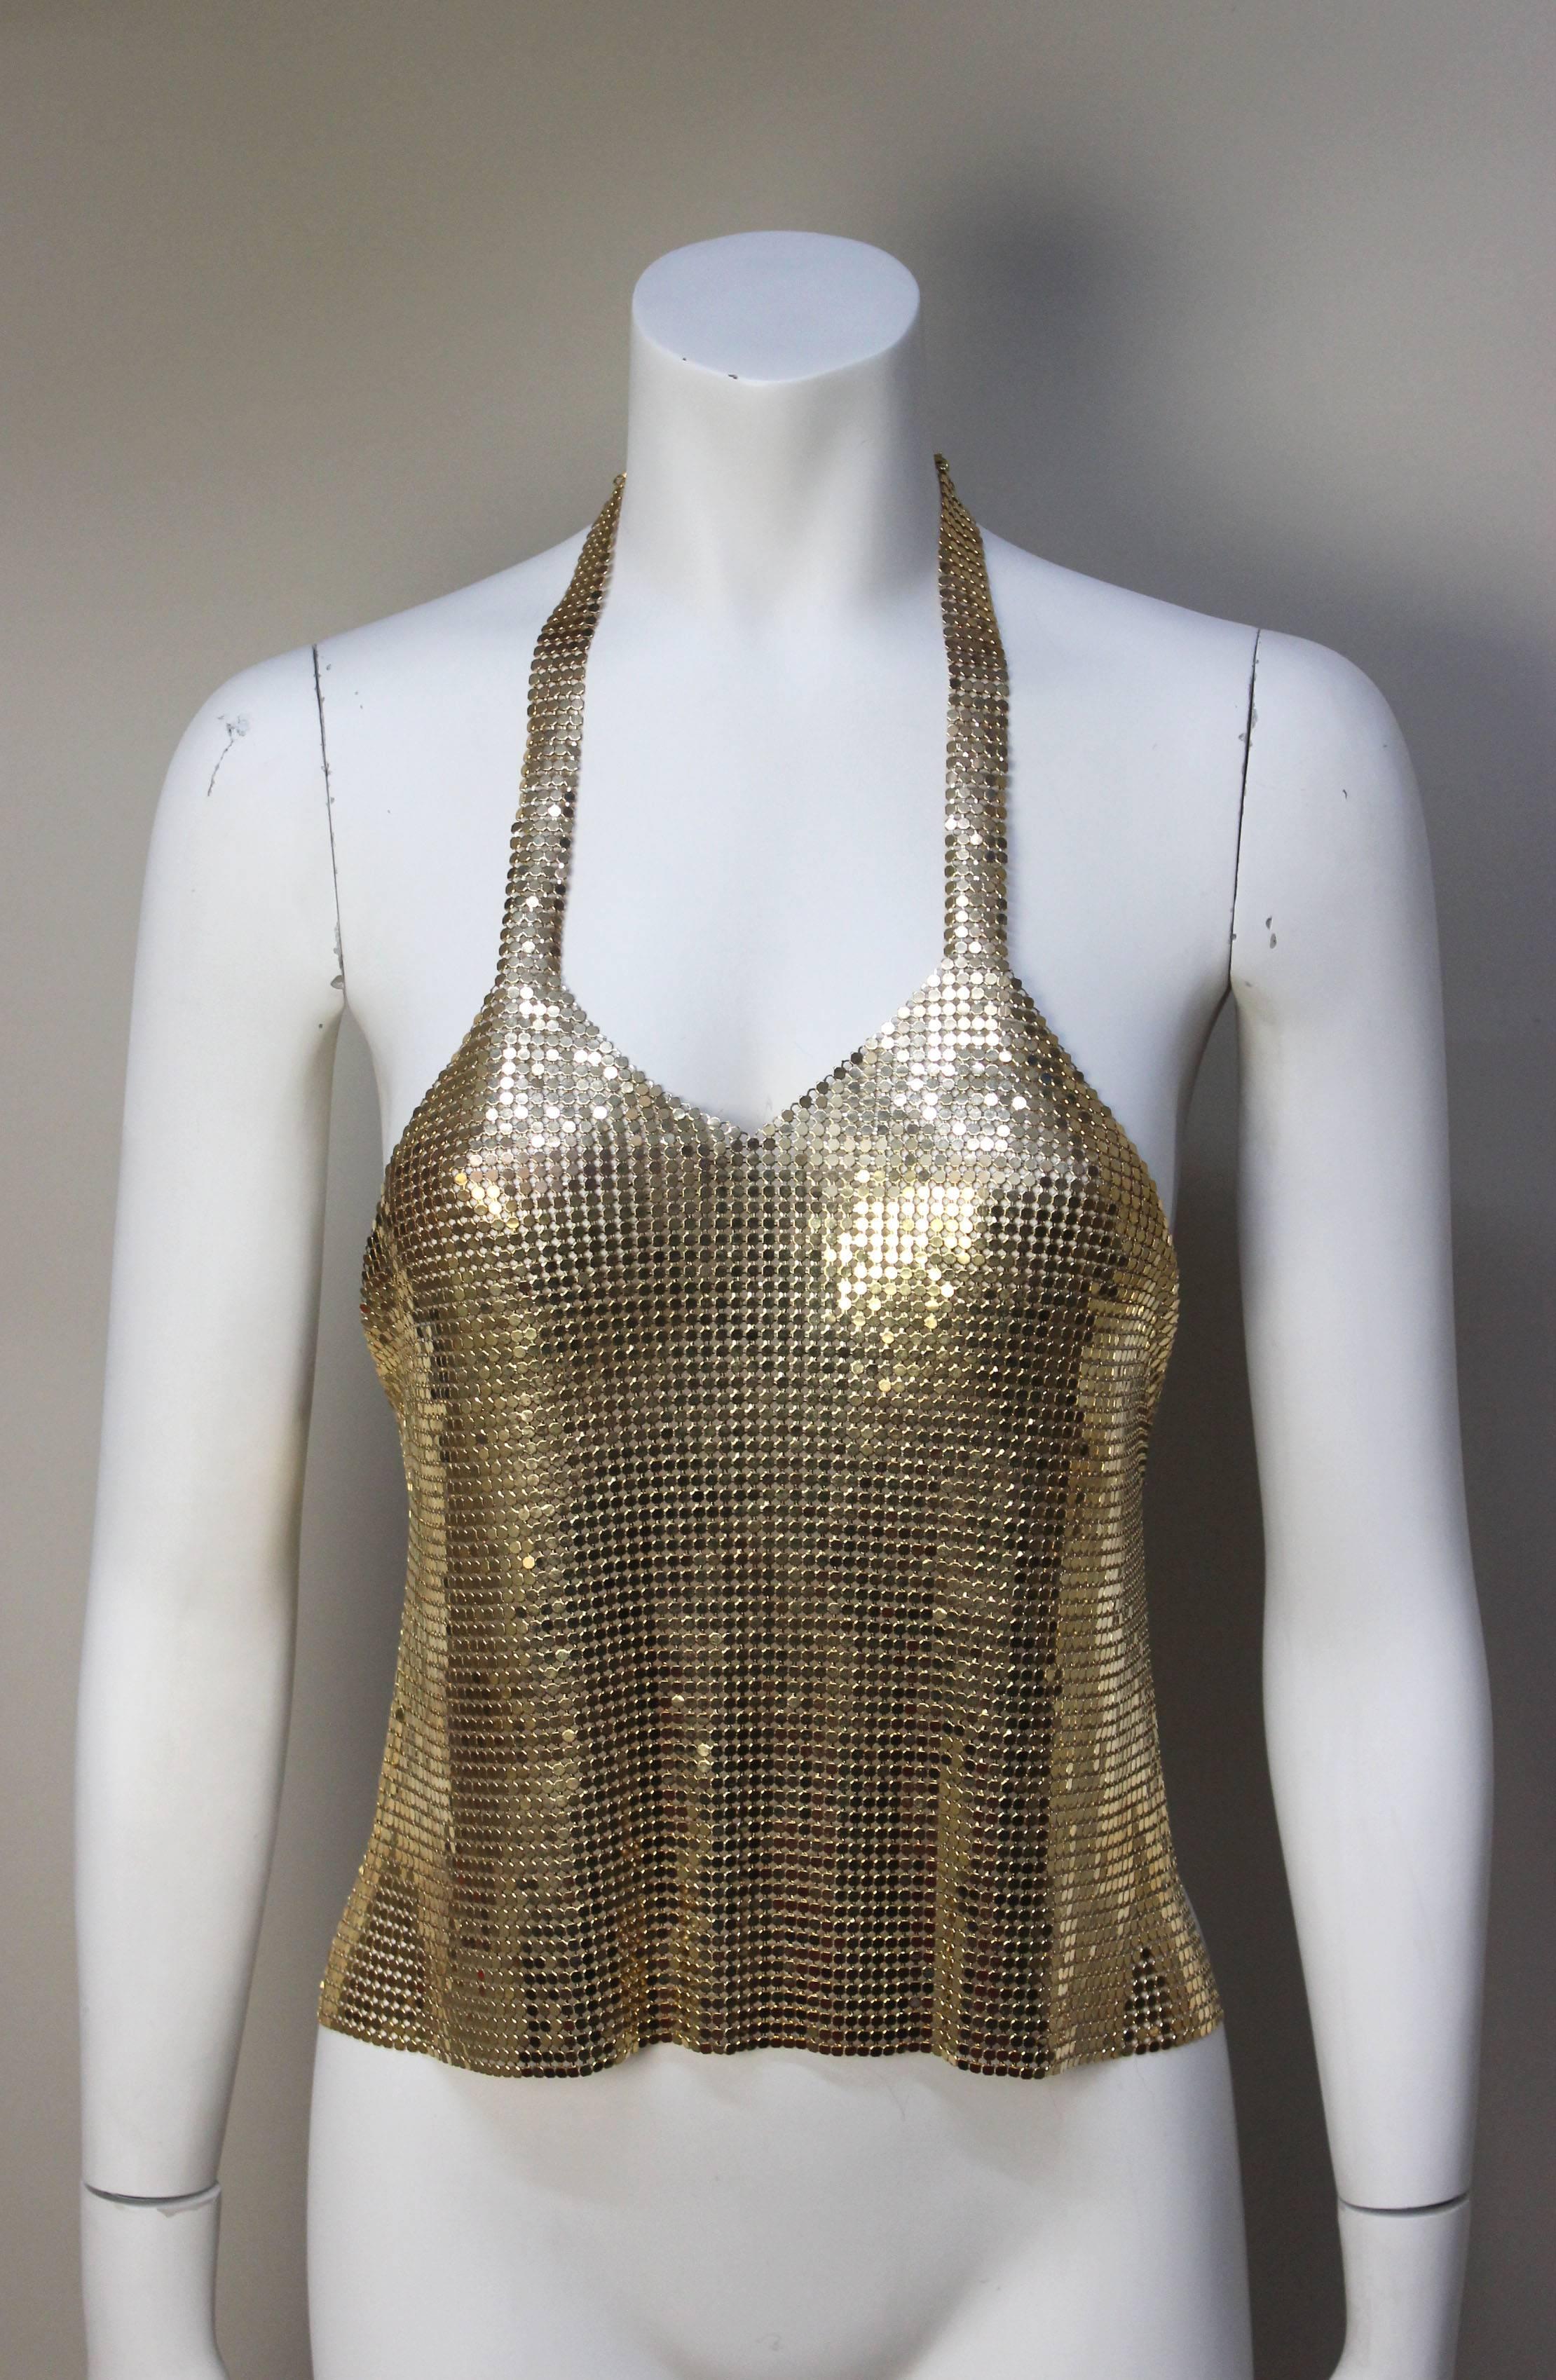 This sexy gold chain mesh top is an original from the 1970's. It's the quintessential disco era garment. It drapes fluidly across the front of the body, held in place by a chain halter top and a chain across the bare back. 